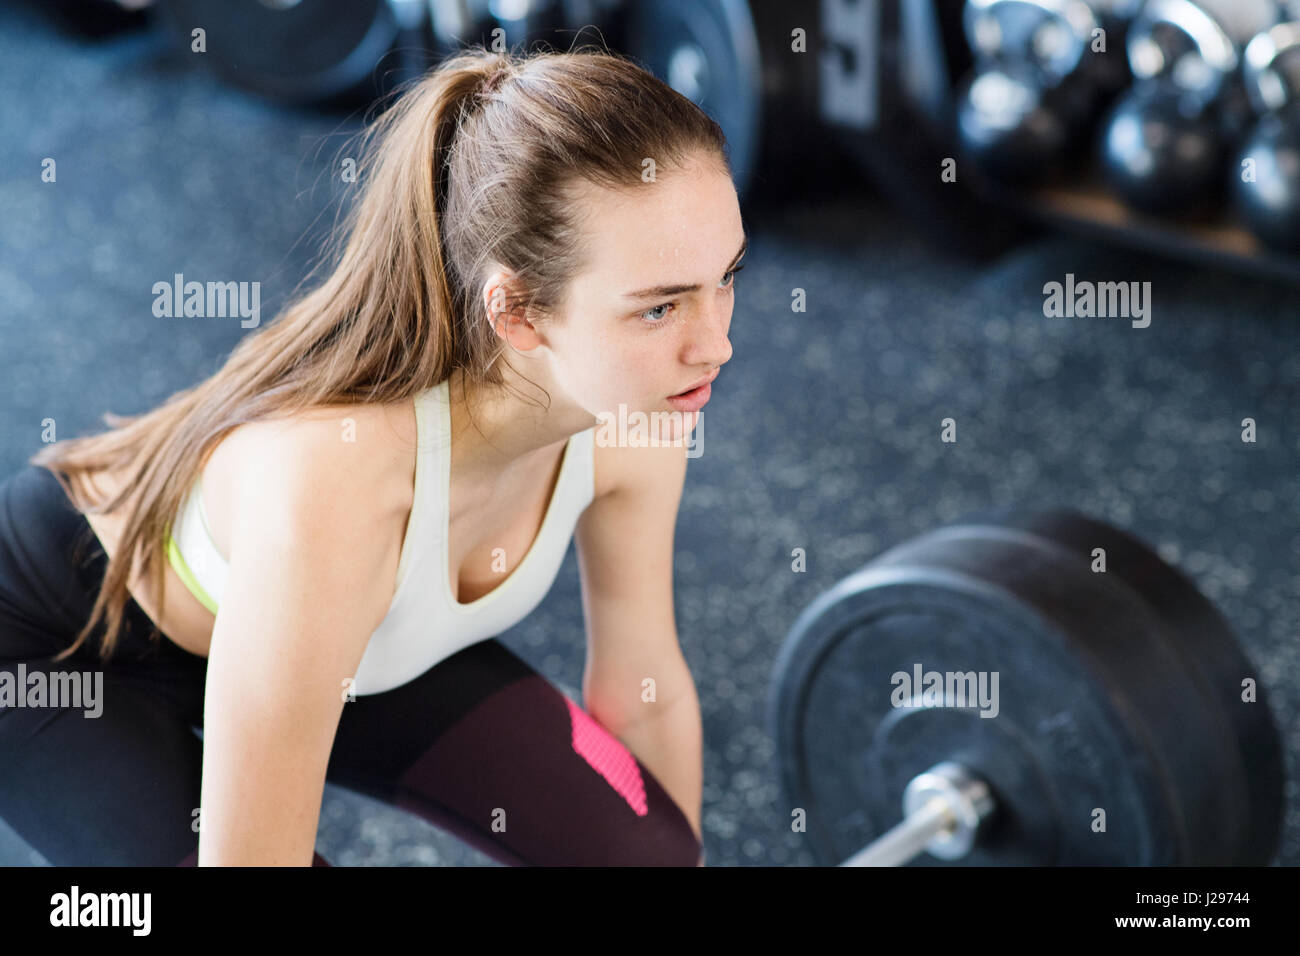 Beautiful young fit woman in gym lifting heavy barbell, flexing muscles Stock Photo